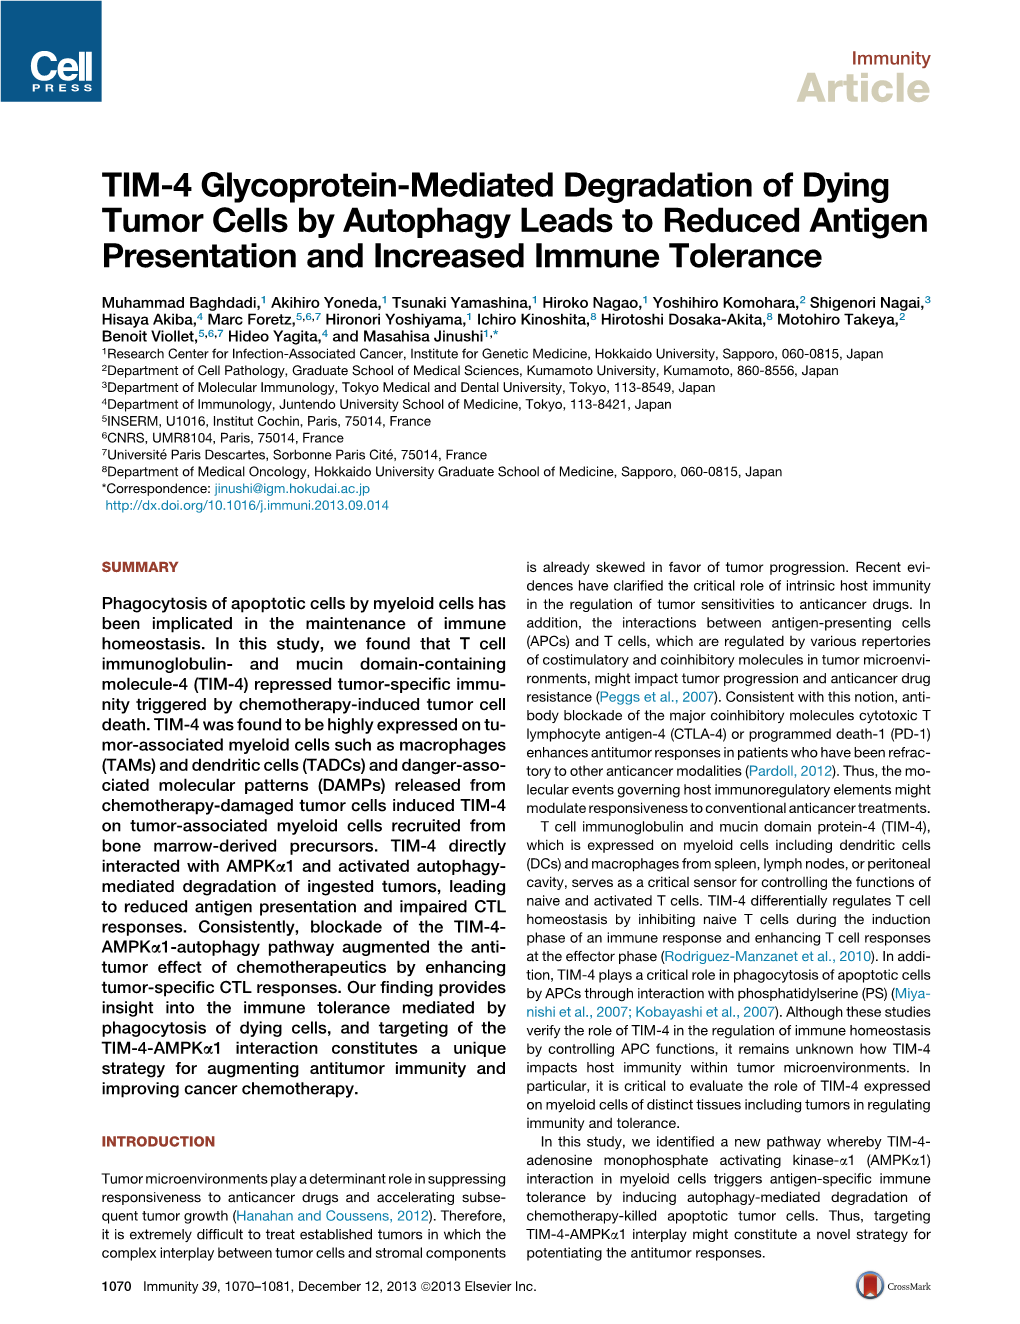 TIM-4 Glycoprotein-Mediated Degradation of Dying Tumor Cells by Autophagy Leads to Reduced Antigen Presentation and Increased Immune Tolerance